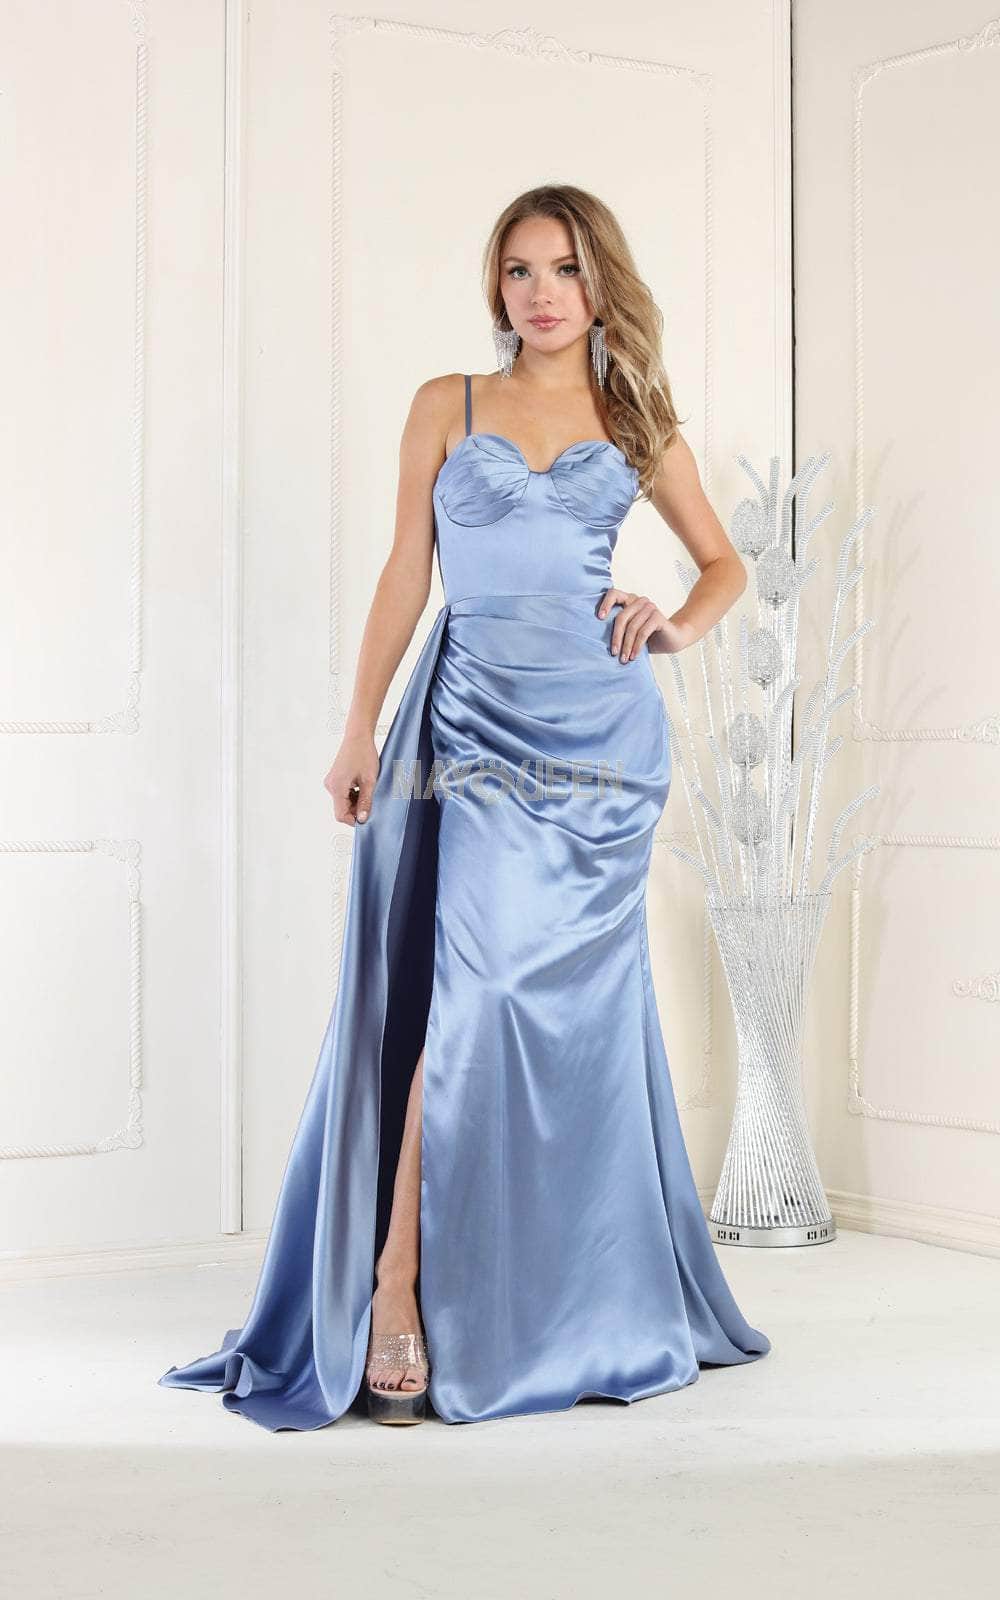 May Queen RQ7960 - Sweetheart Sleeveless Prom Dress Special Occasion Dress